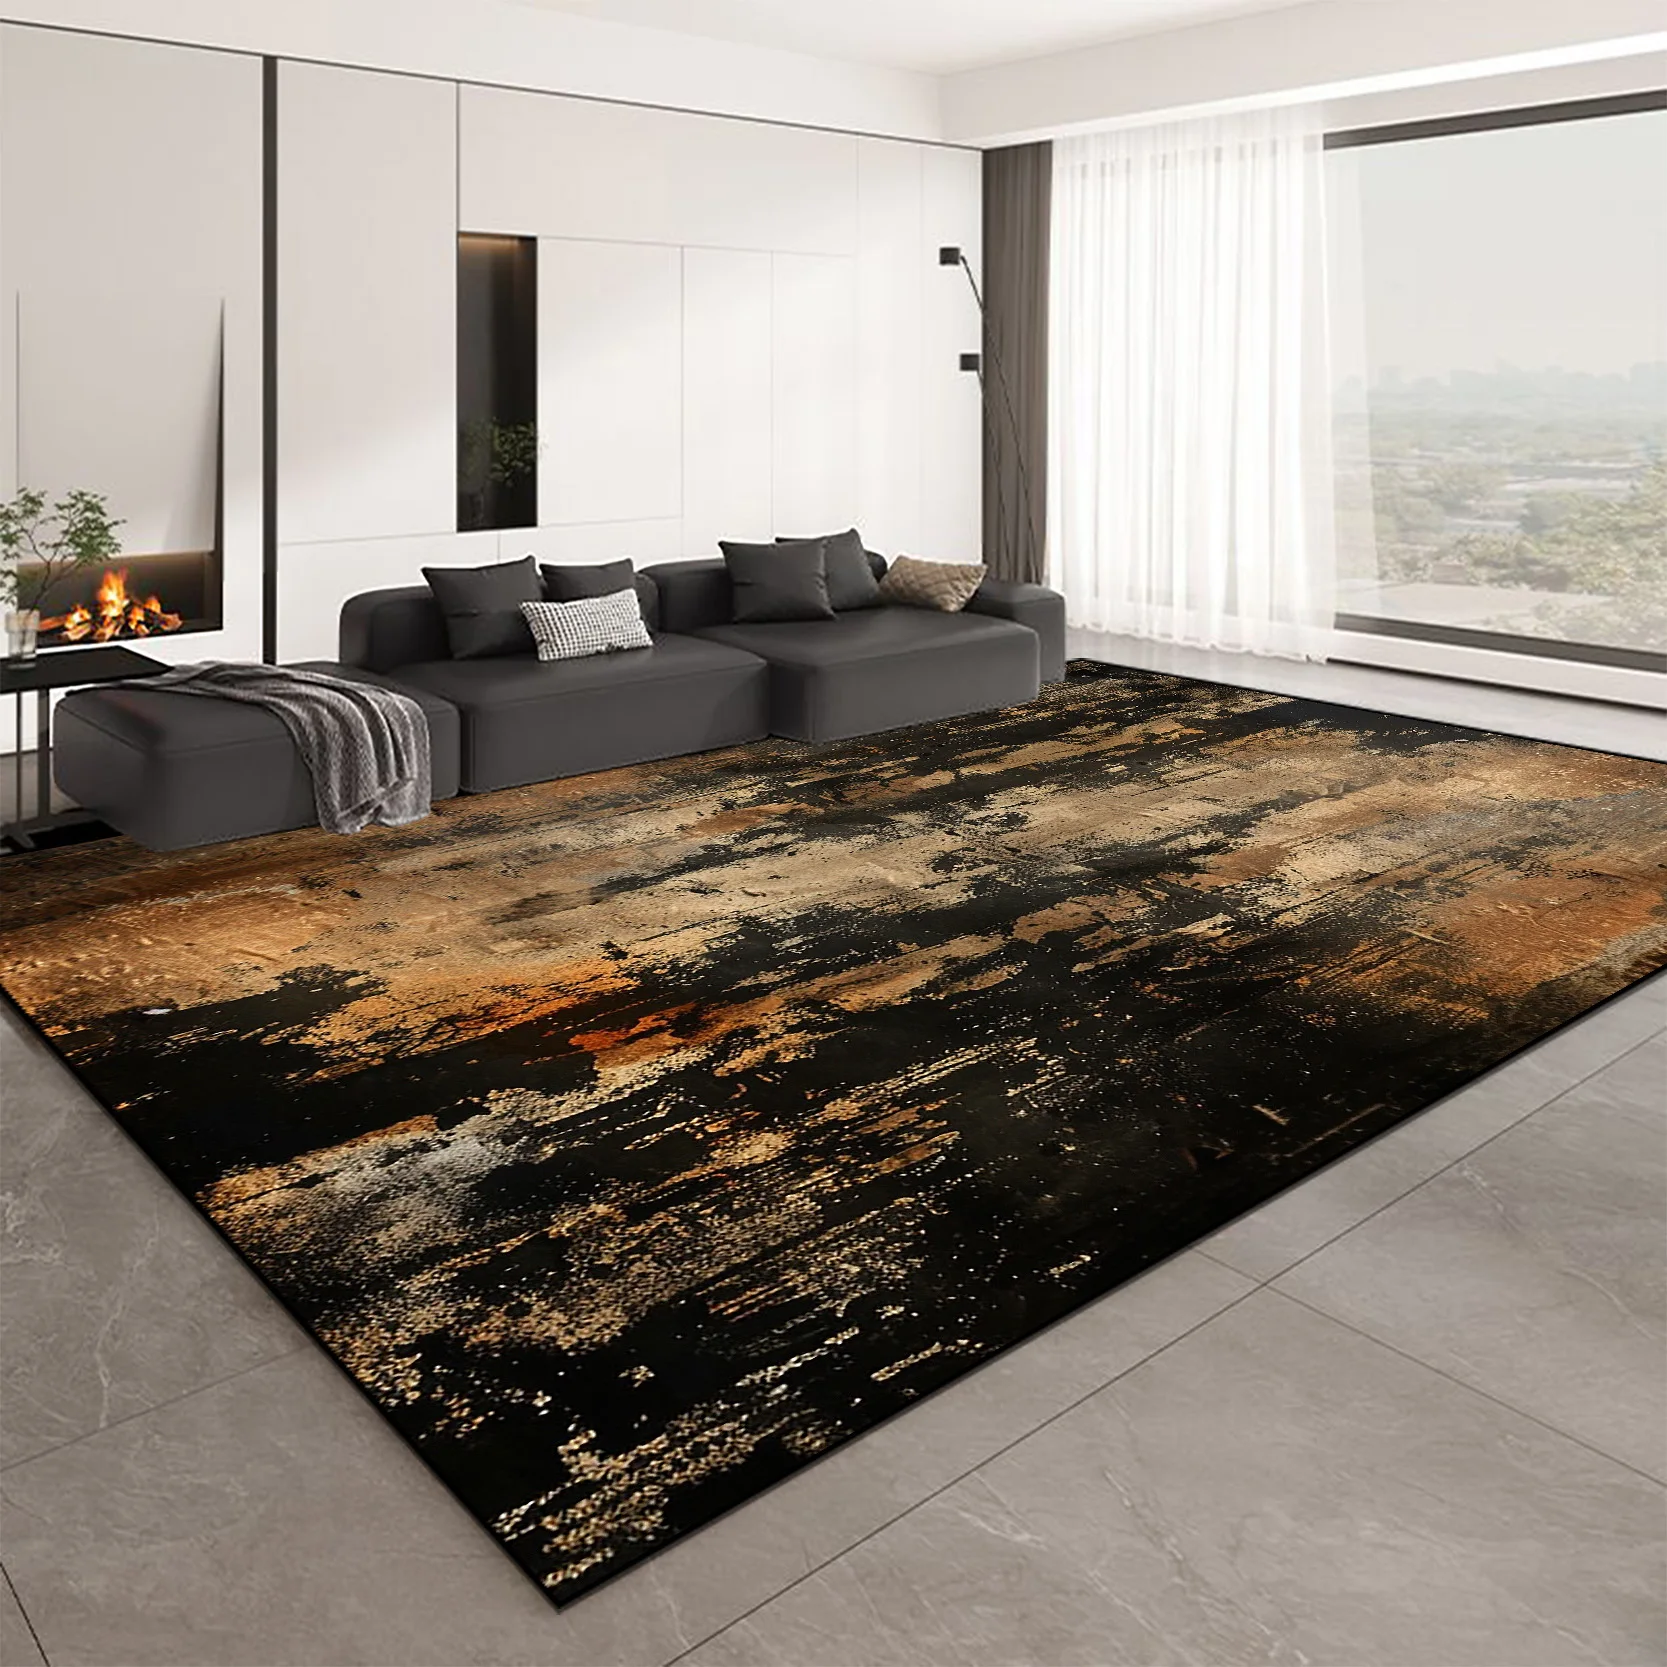 

Nordic Abstract Large Living Room Carpet Fashion Decoration Home Carpets Non-slip Rugs for Bedroom Decor Lounge Sofa Floor Mat